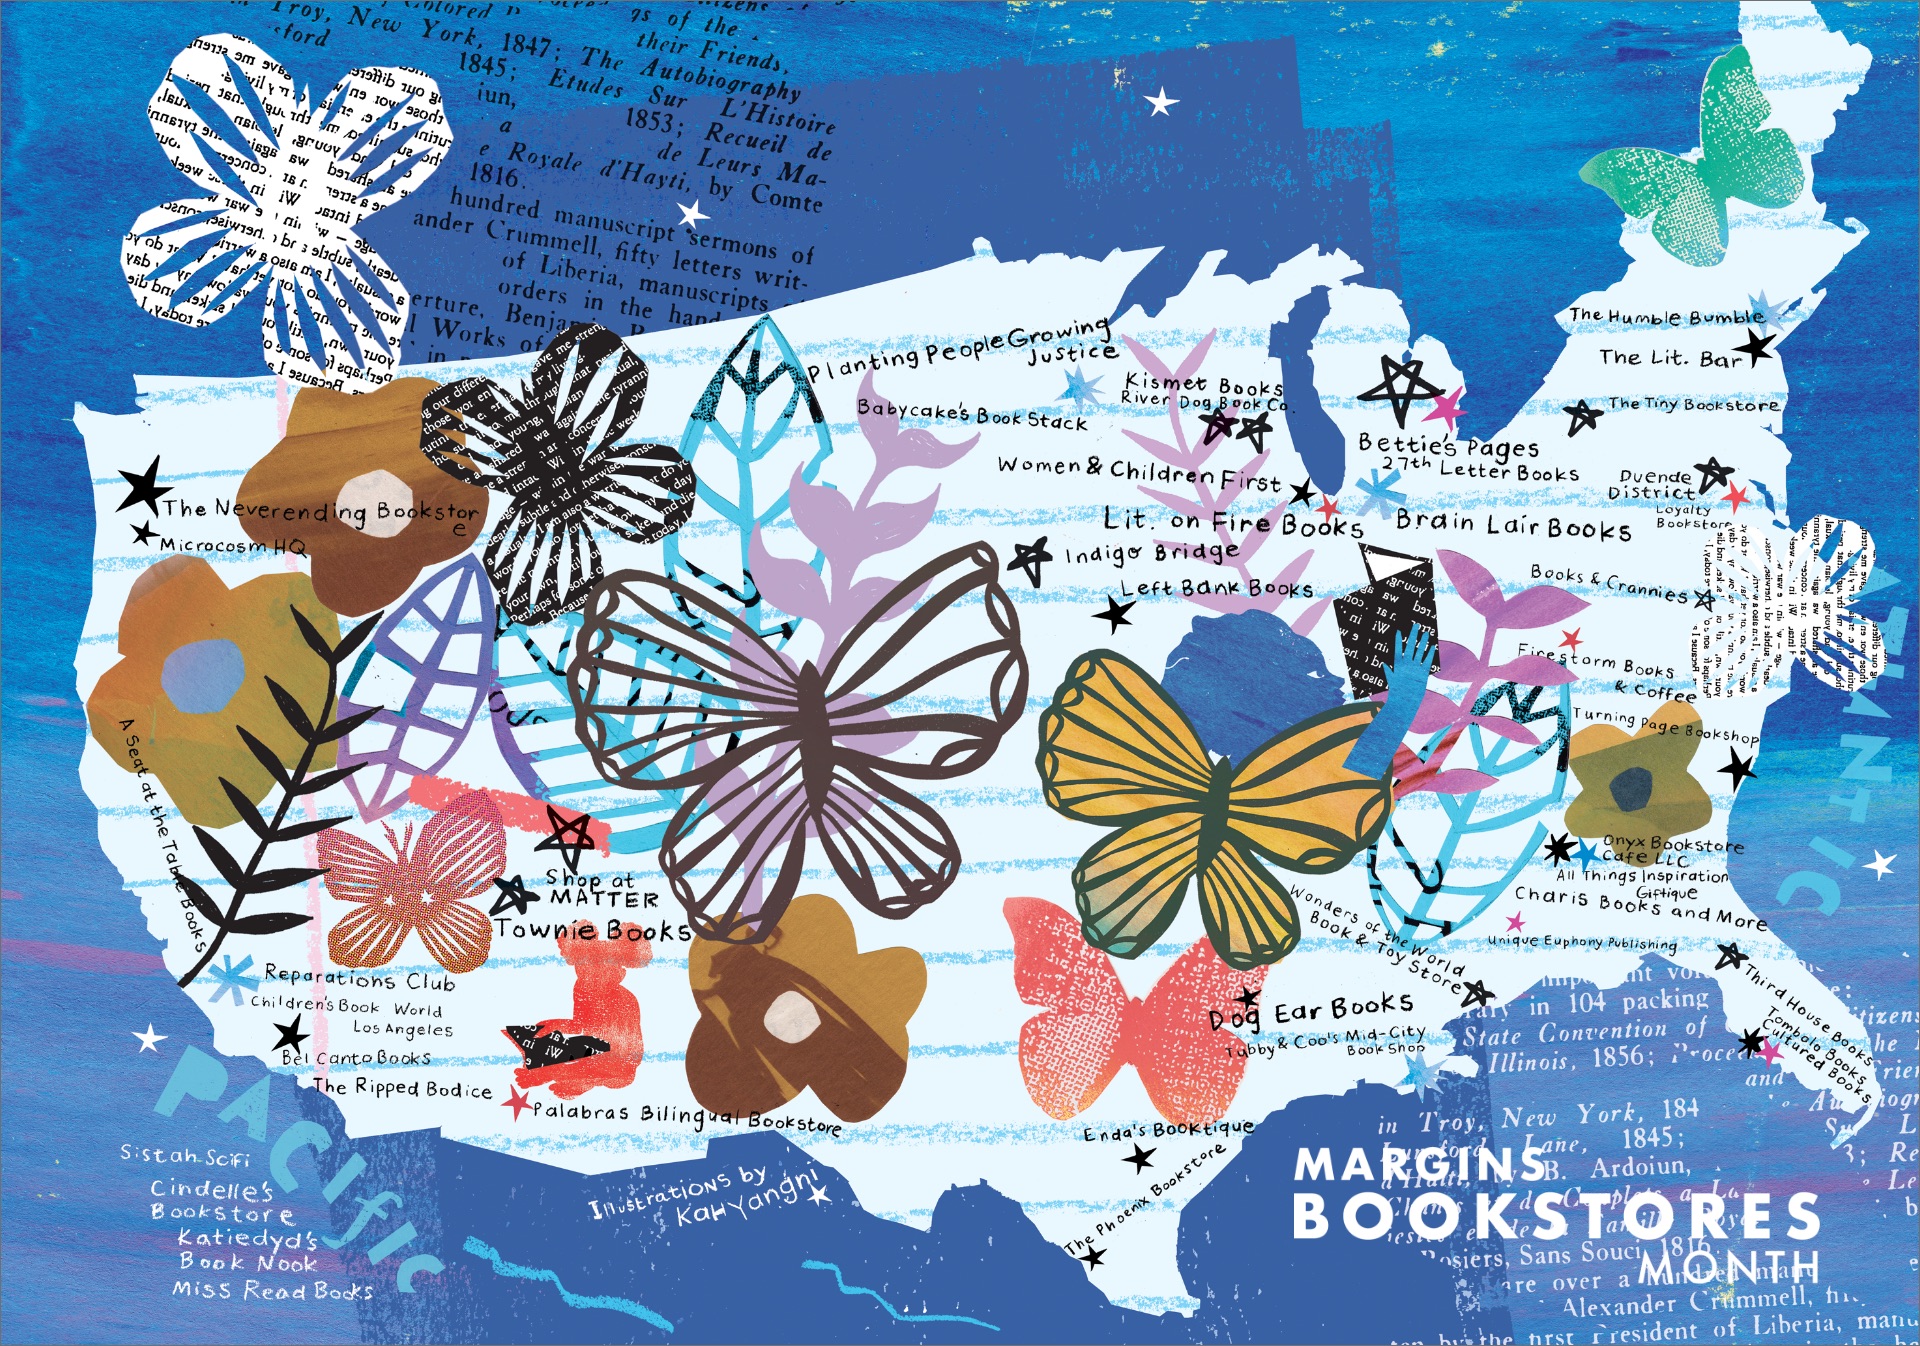 Image of the outline of the united states on a blue background, with images of butterflies and flowers overlaid and the caption Margins Bookstores Month